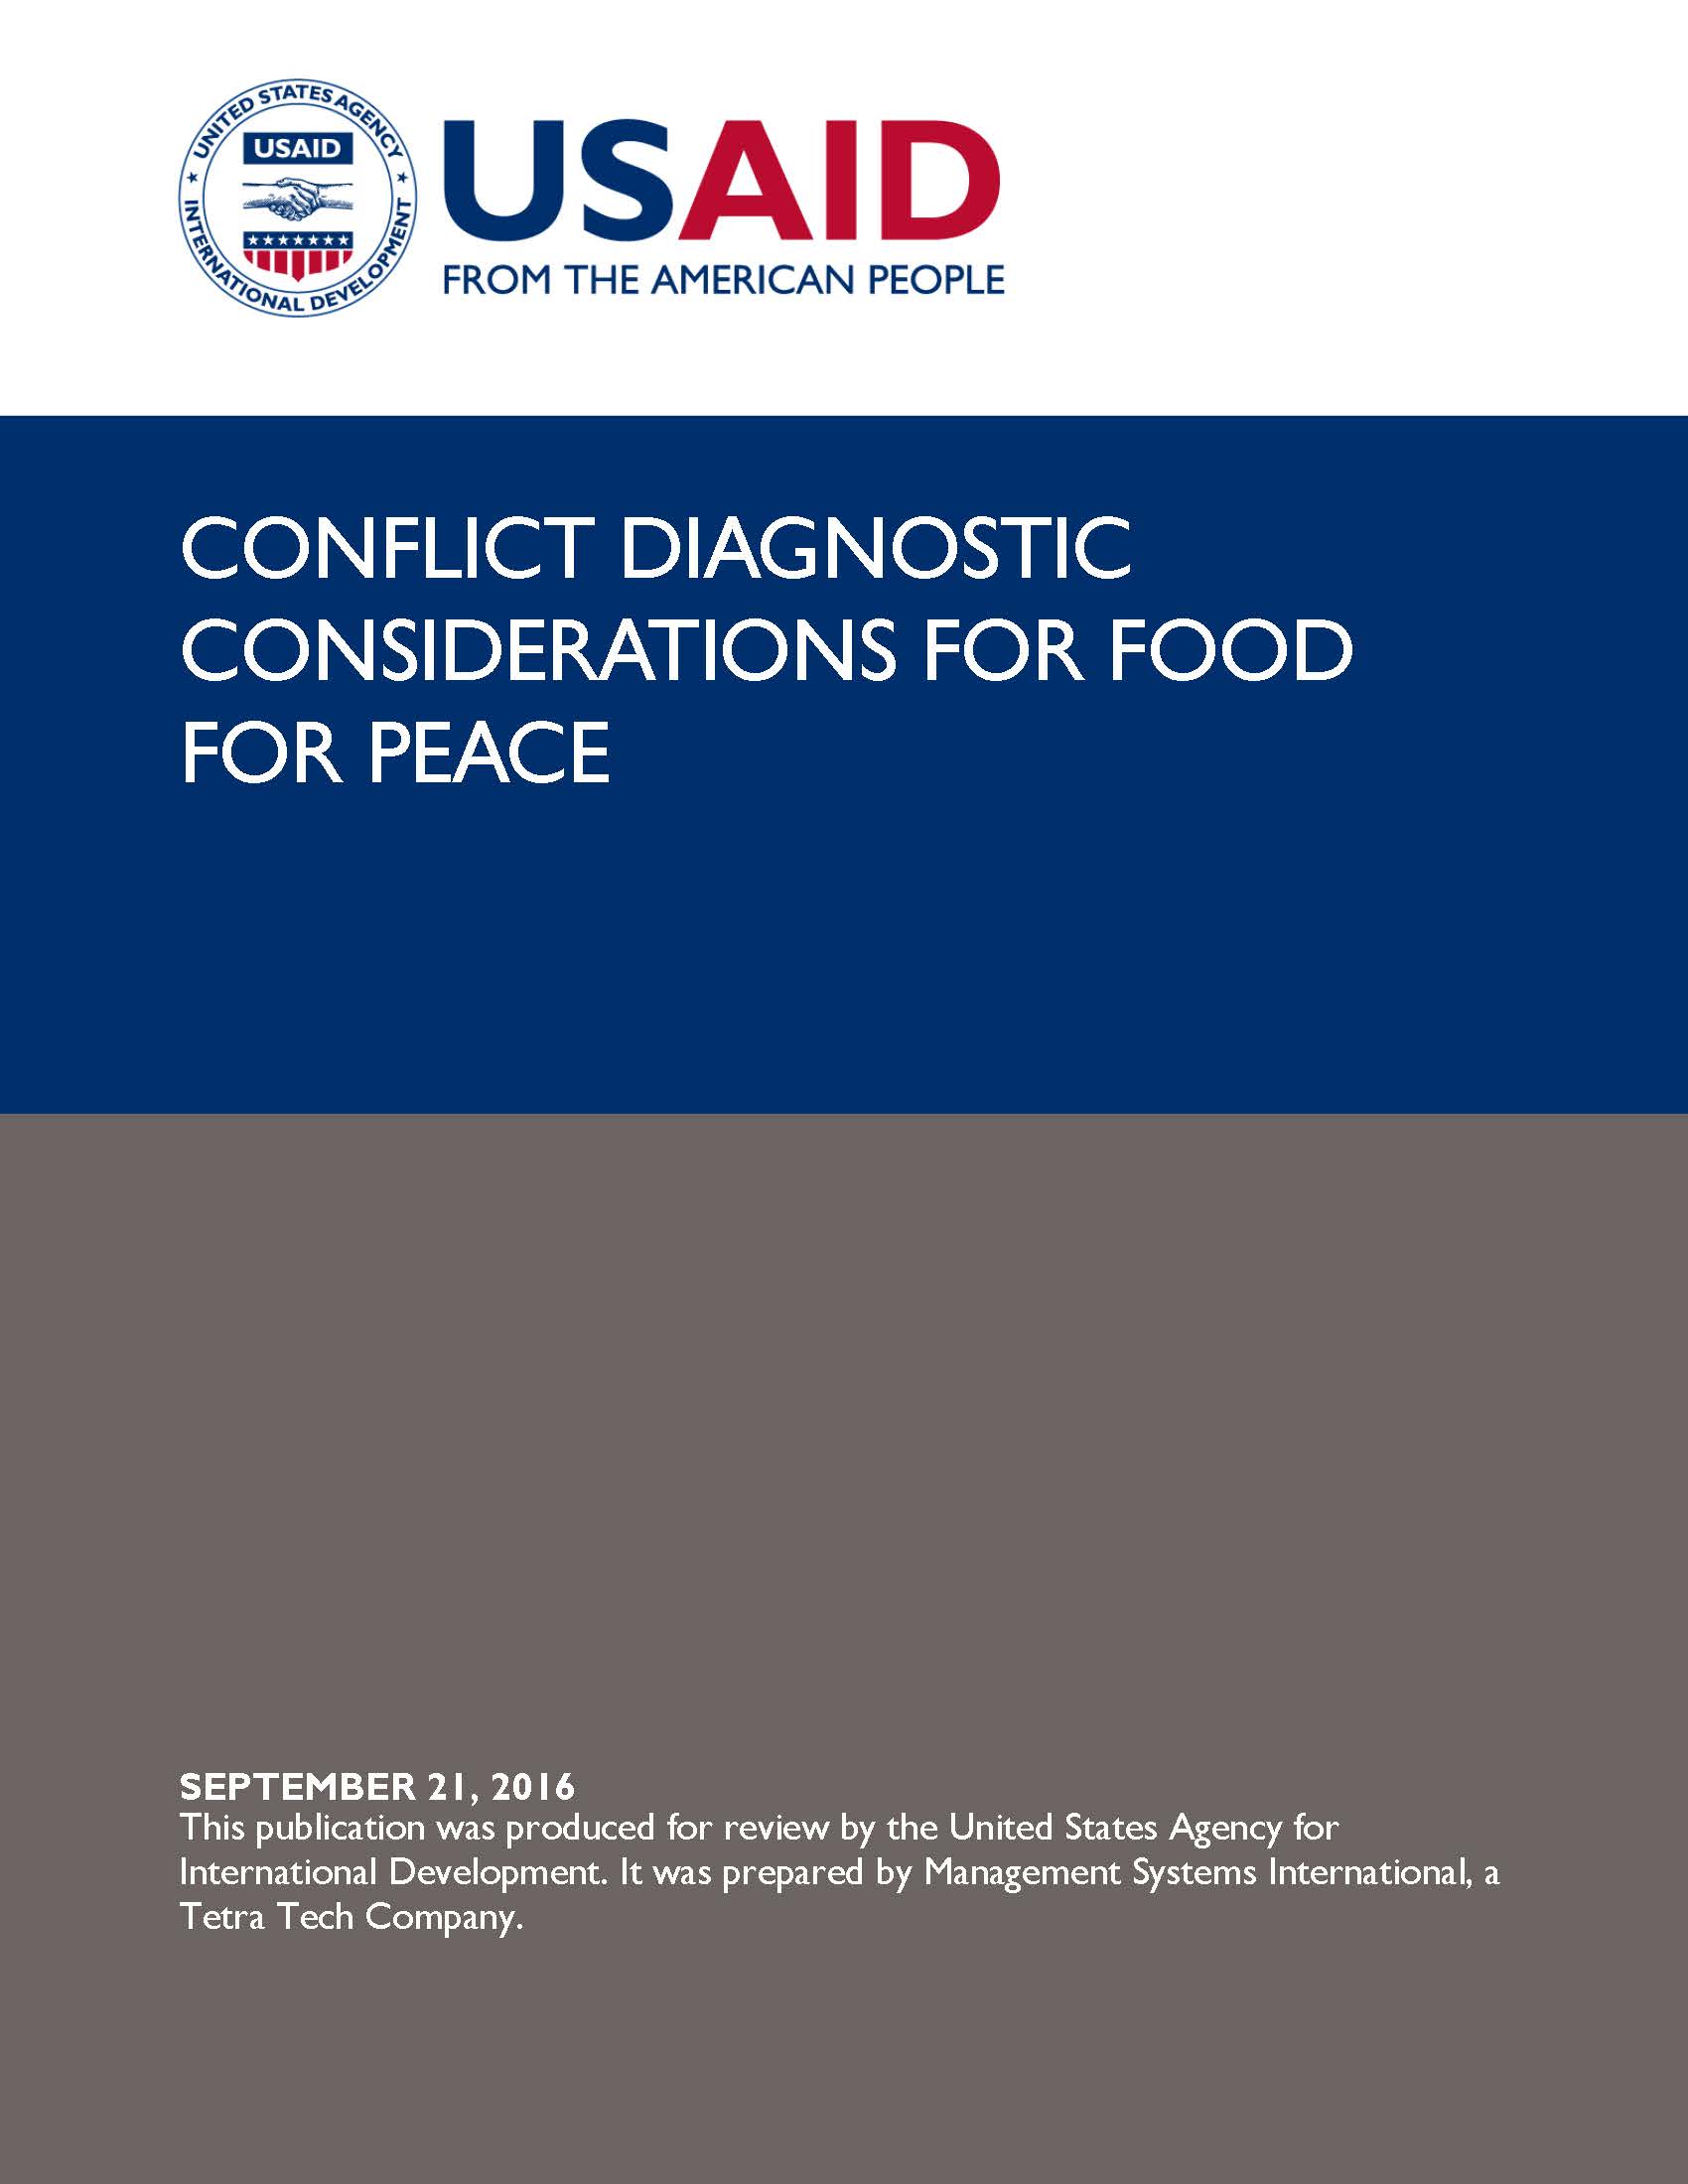 Conflict Diagnostic Considerations for Food for Peace